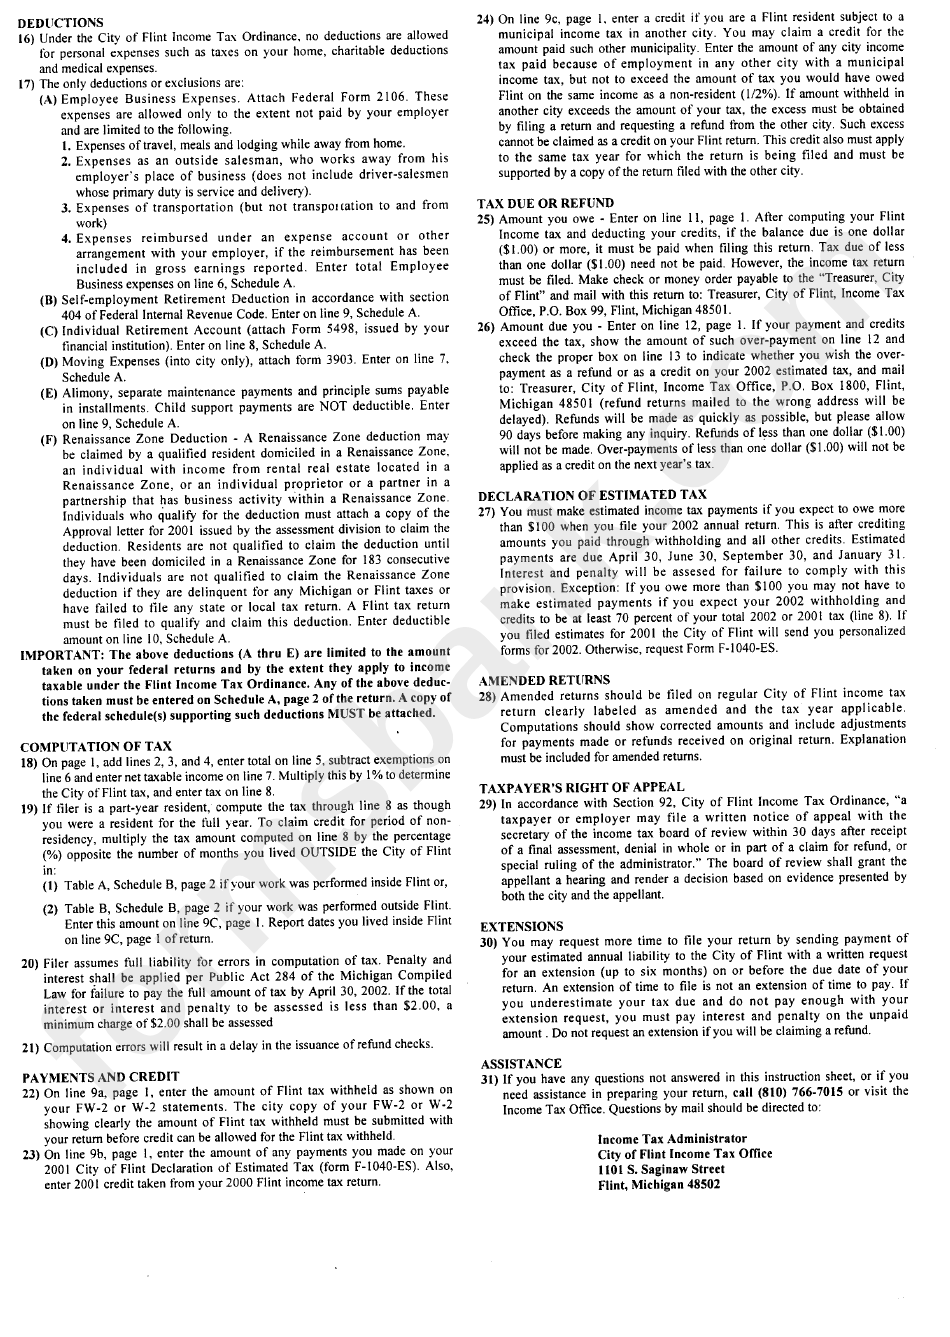 Form F1040-R - 2001 City Of Flint, Income Tax For Resident Returns - Instructions